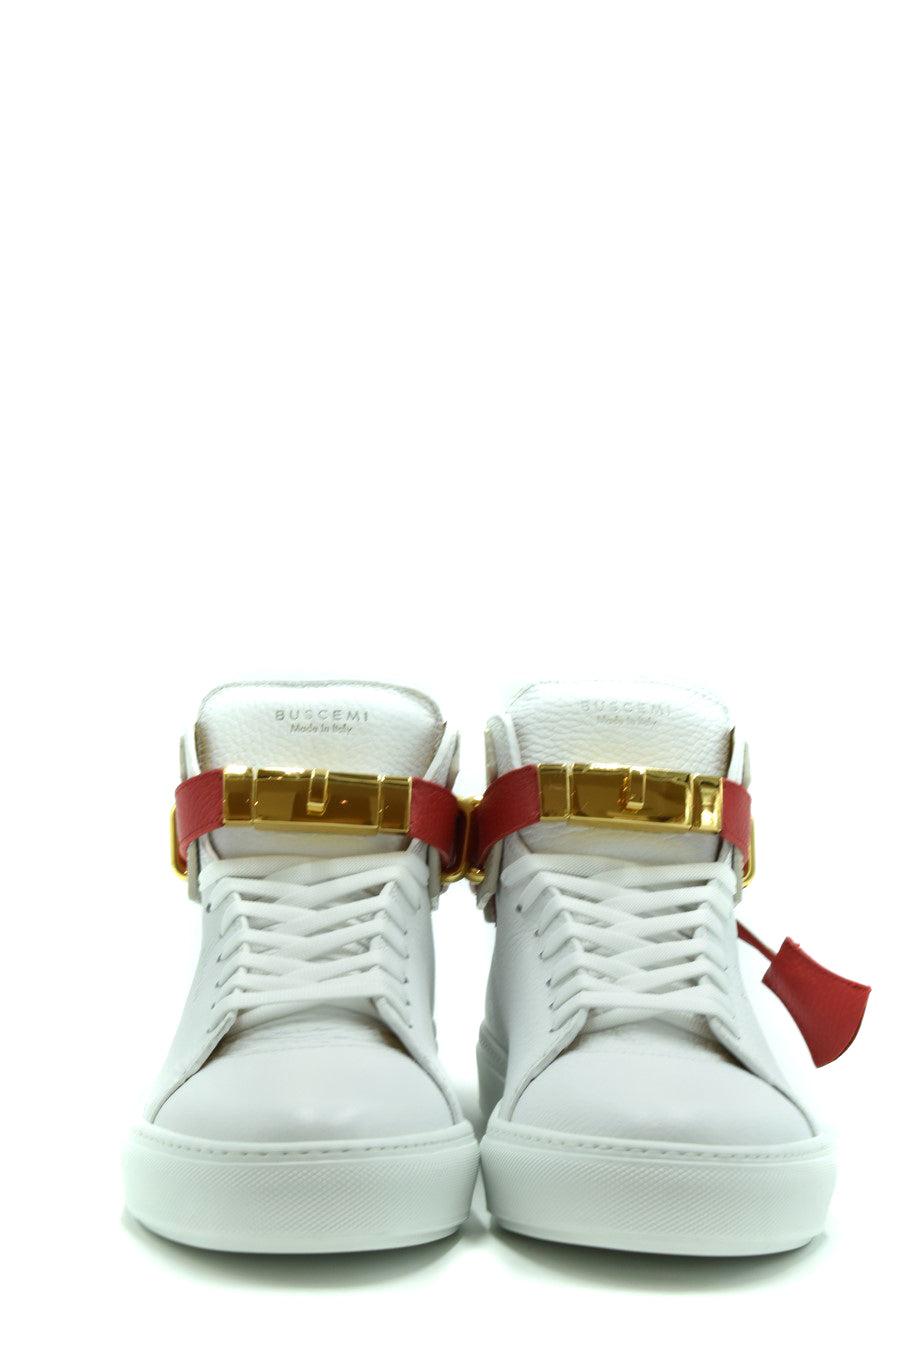 Buscemi Sneakers in White for Men - Save 8% | Lyst